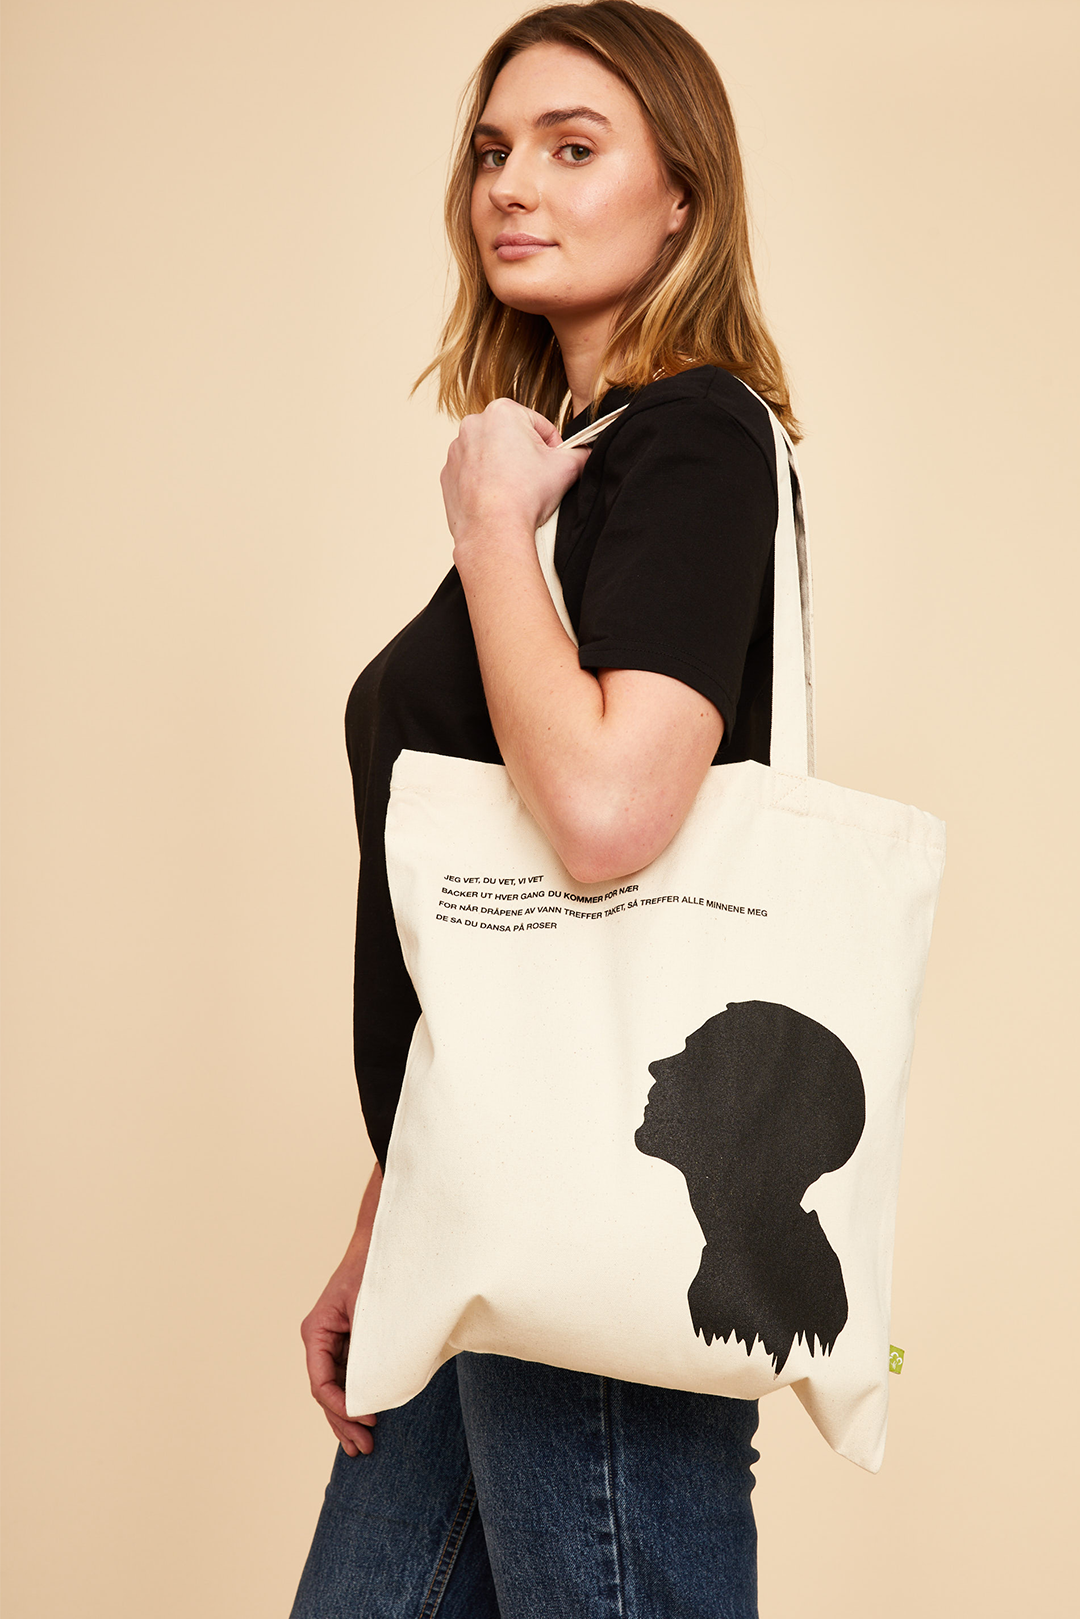 I KNOW, YOU KNOW - NATURAL TOTEBAG